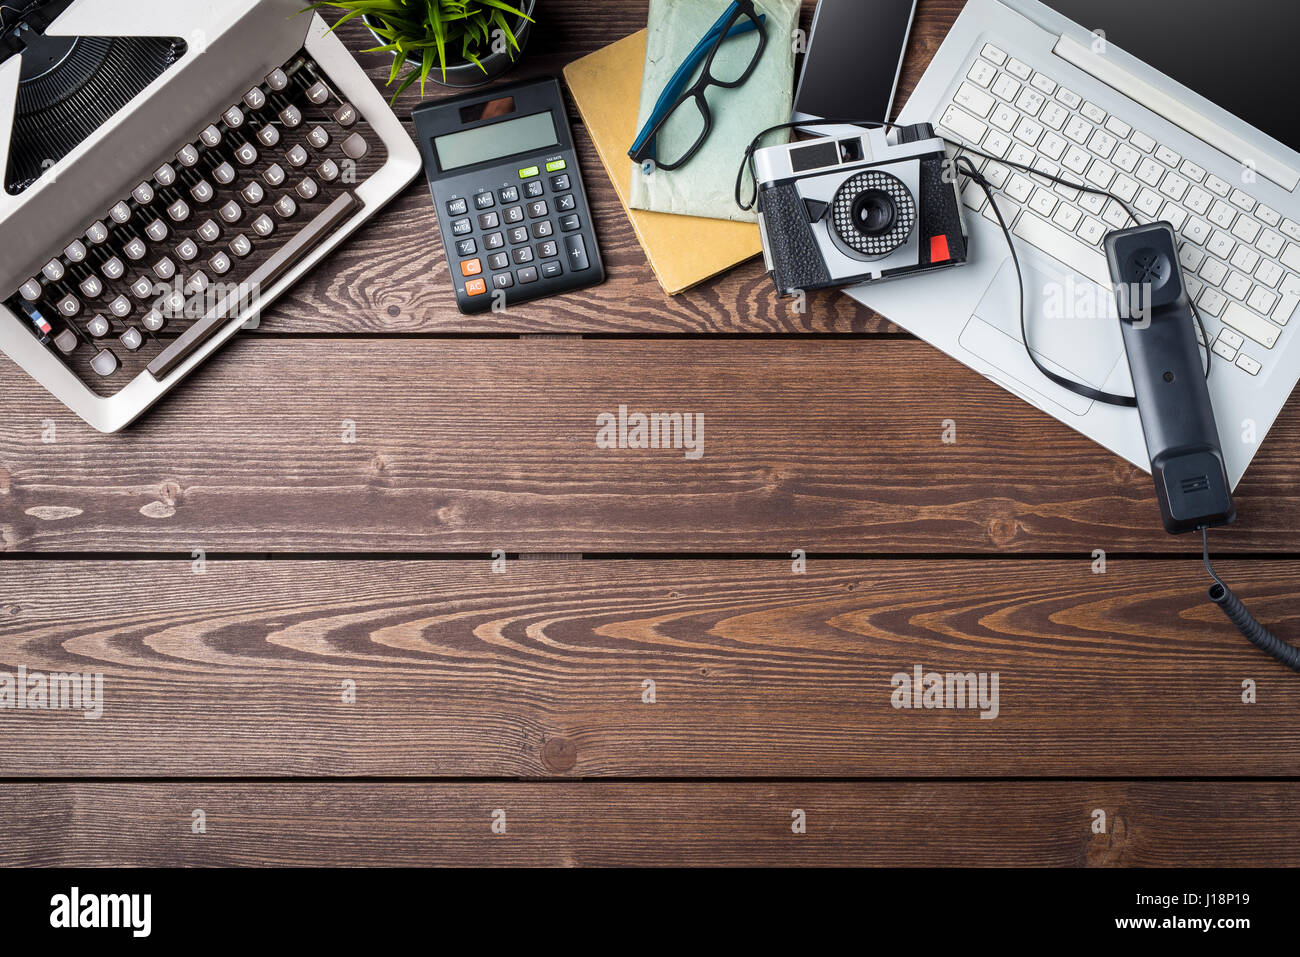 Old and modern devices on wooden table. Technology progress concept Stock Photo